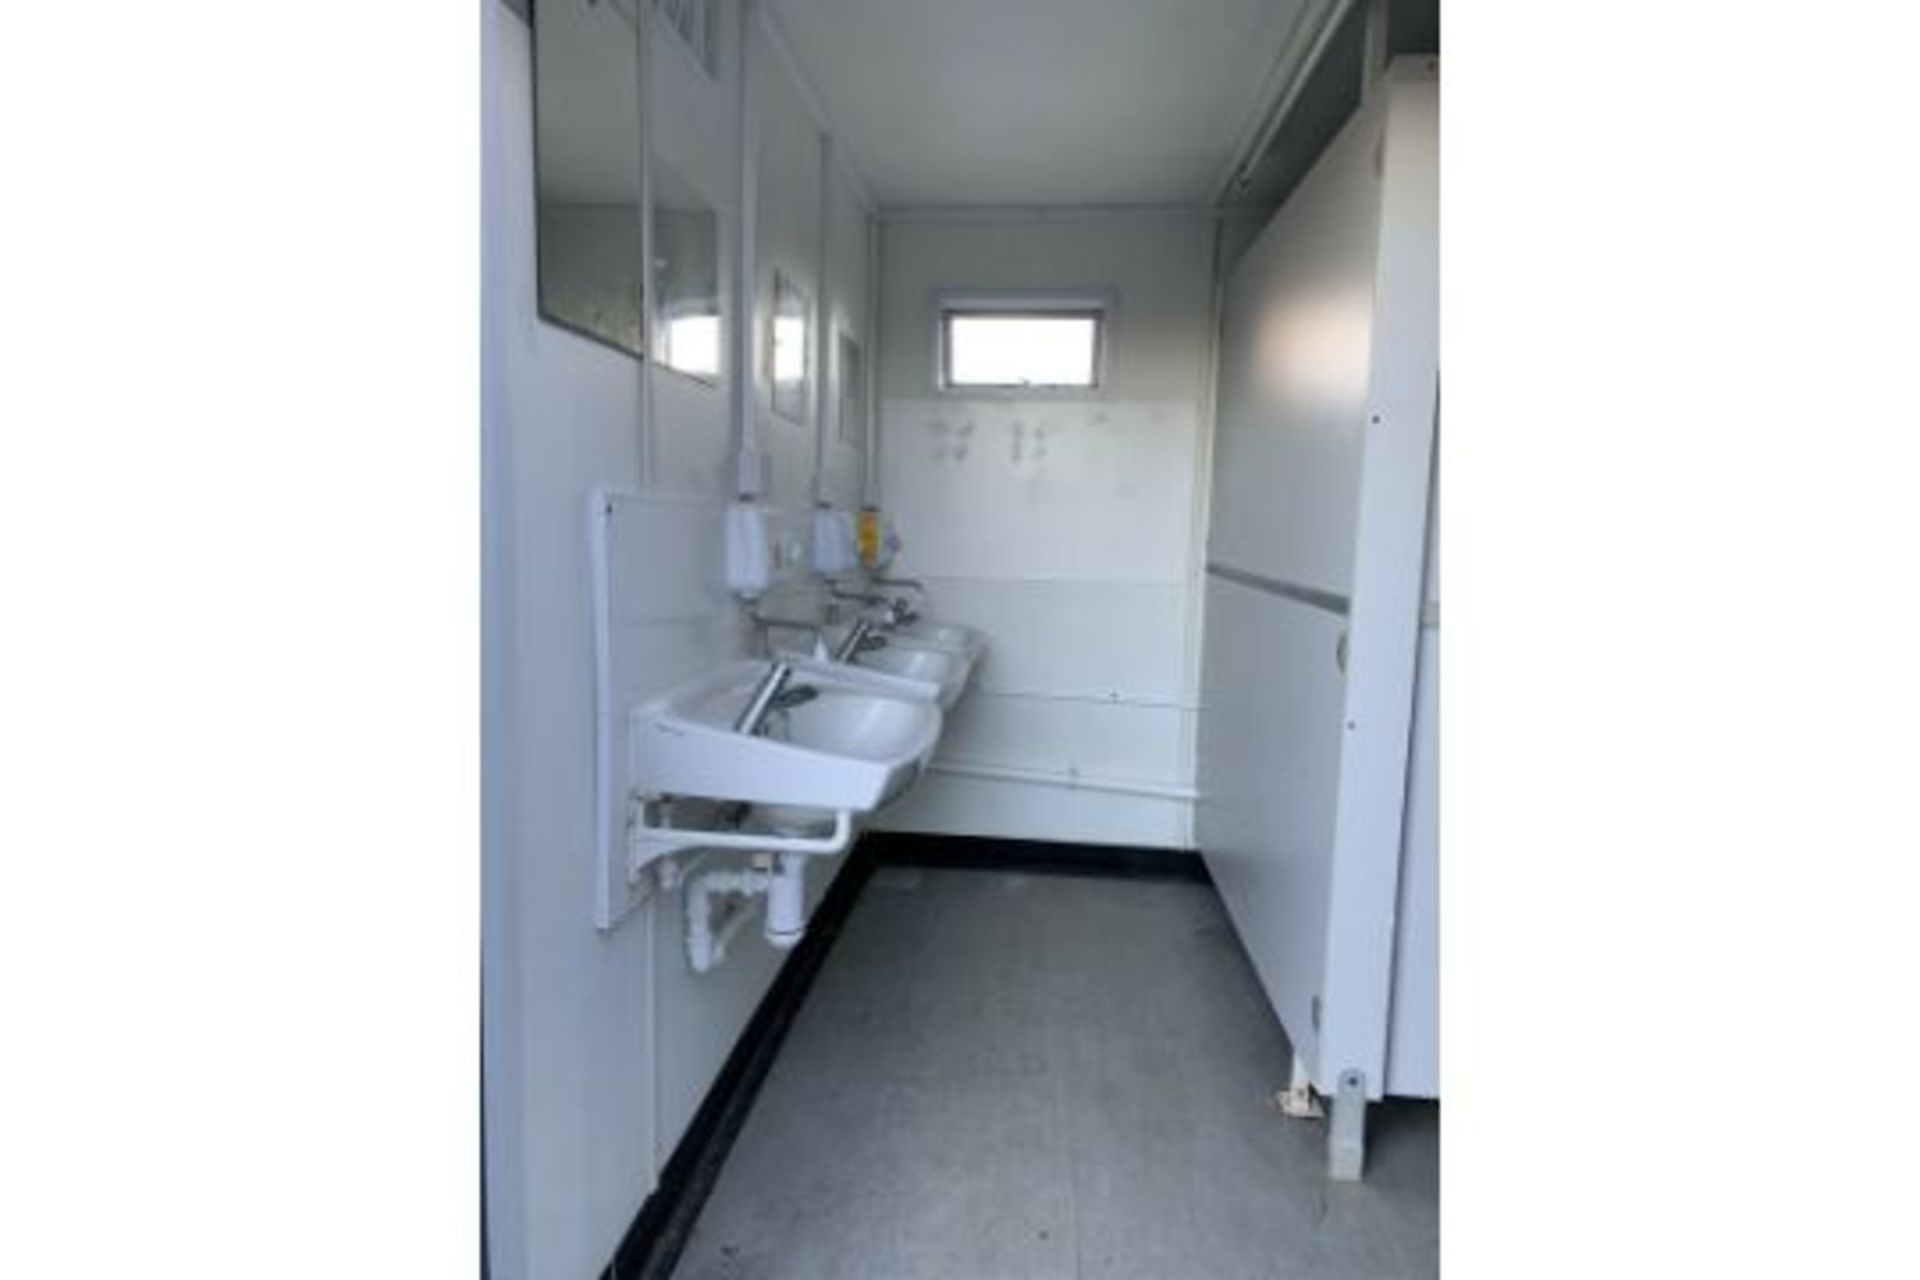 Portable Toilet Block Site Loo Cabin Steel Contain - Image 4 of 10